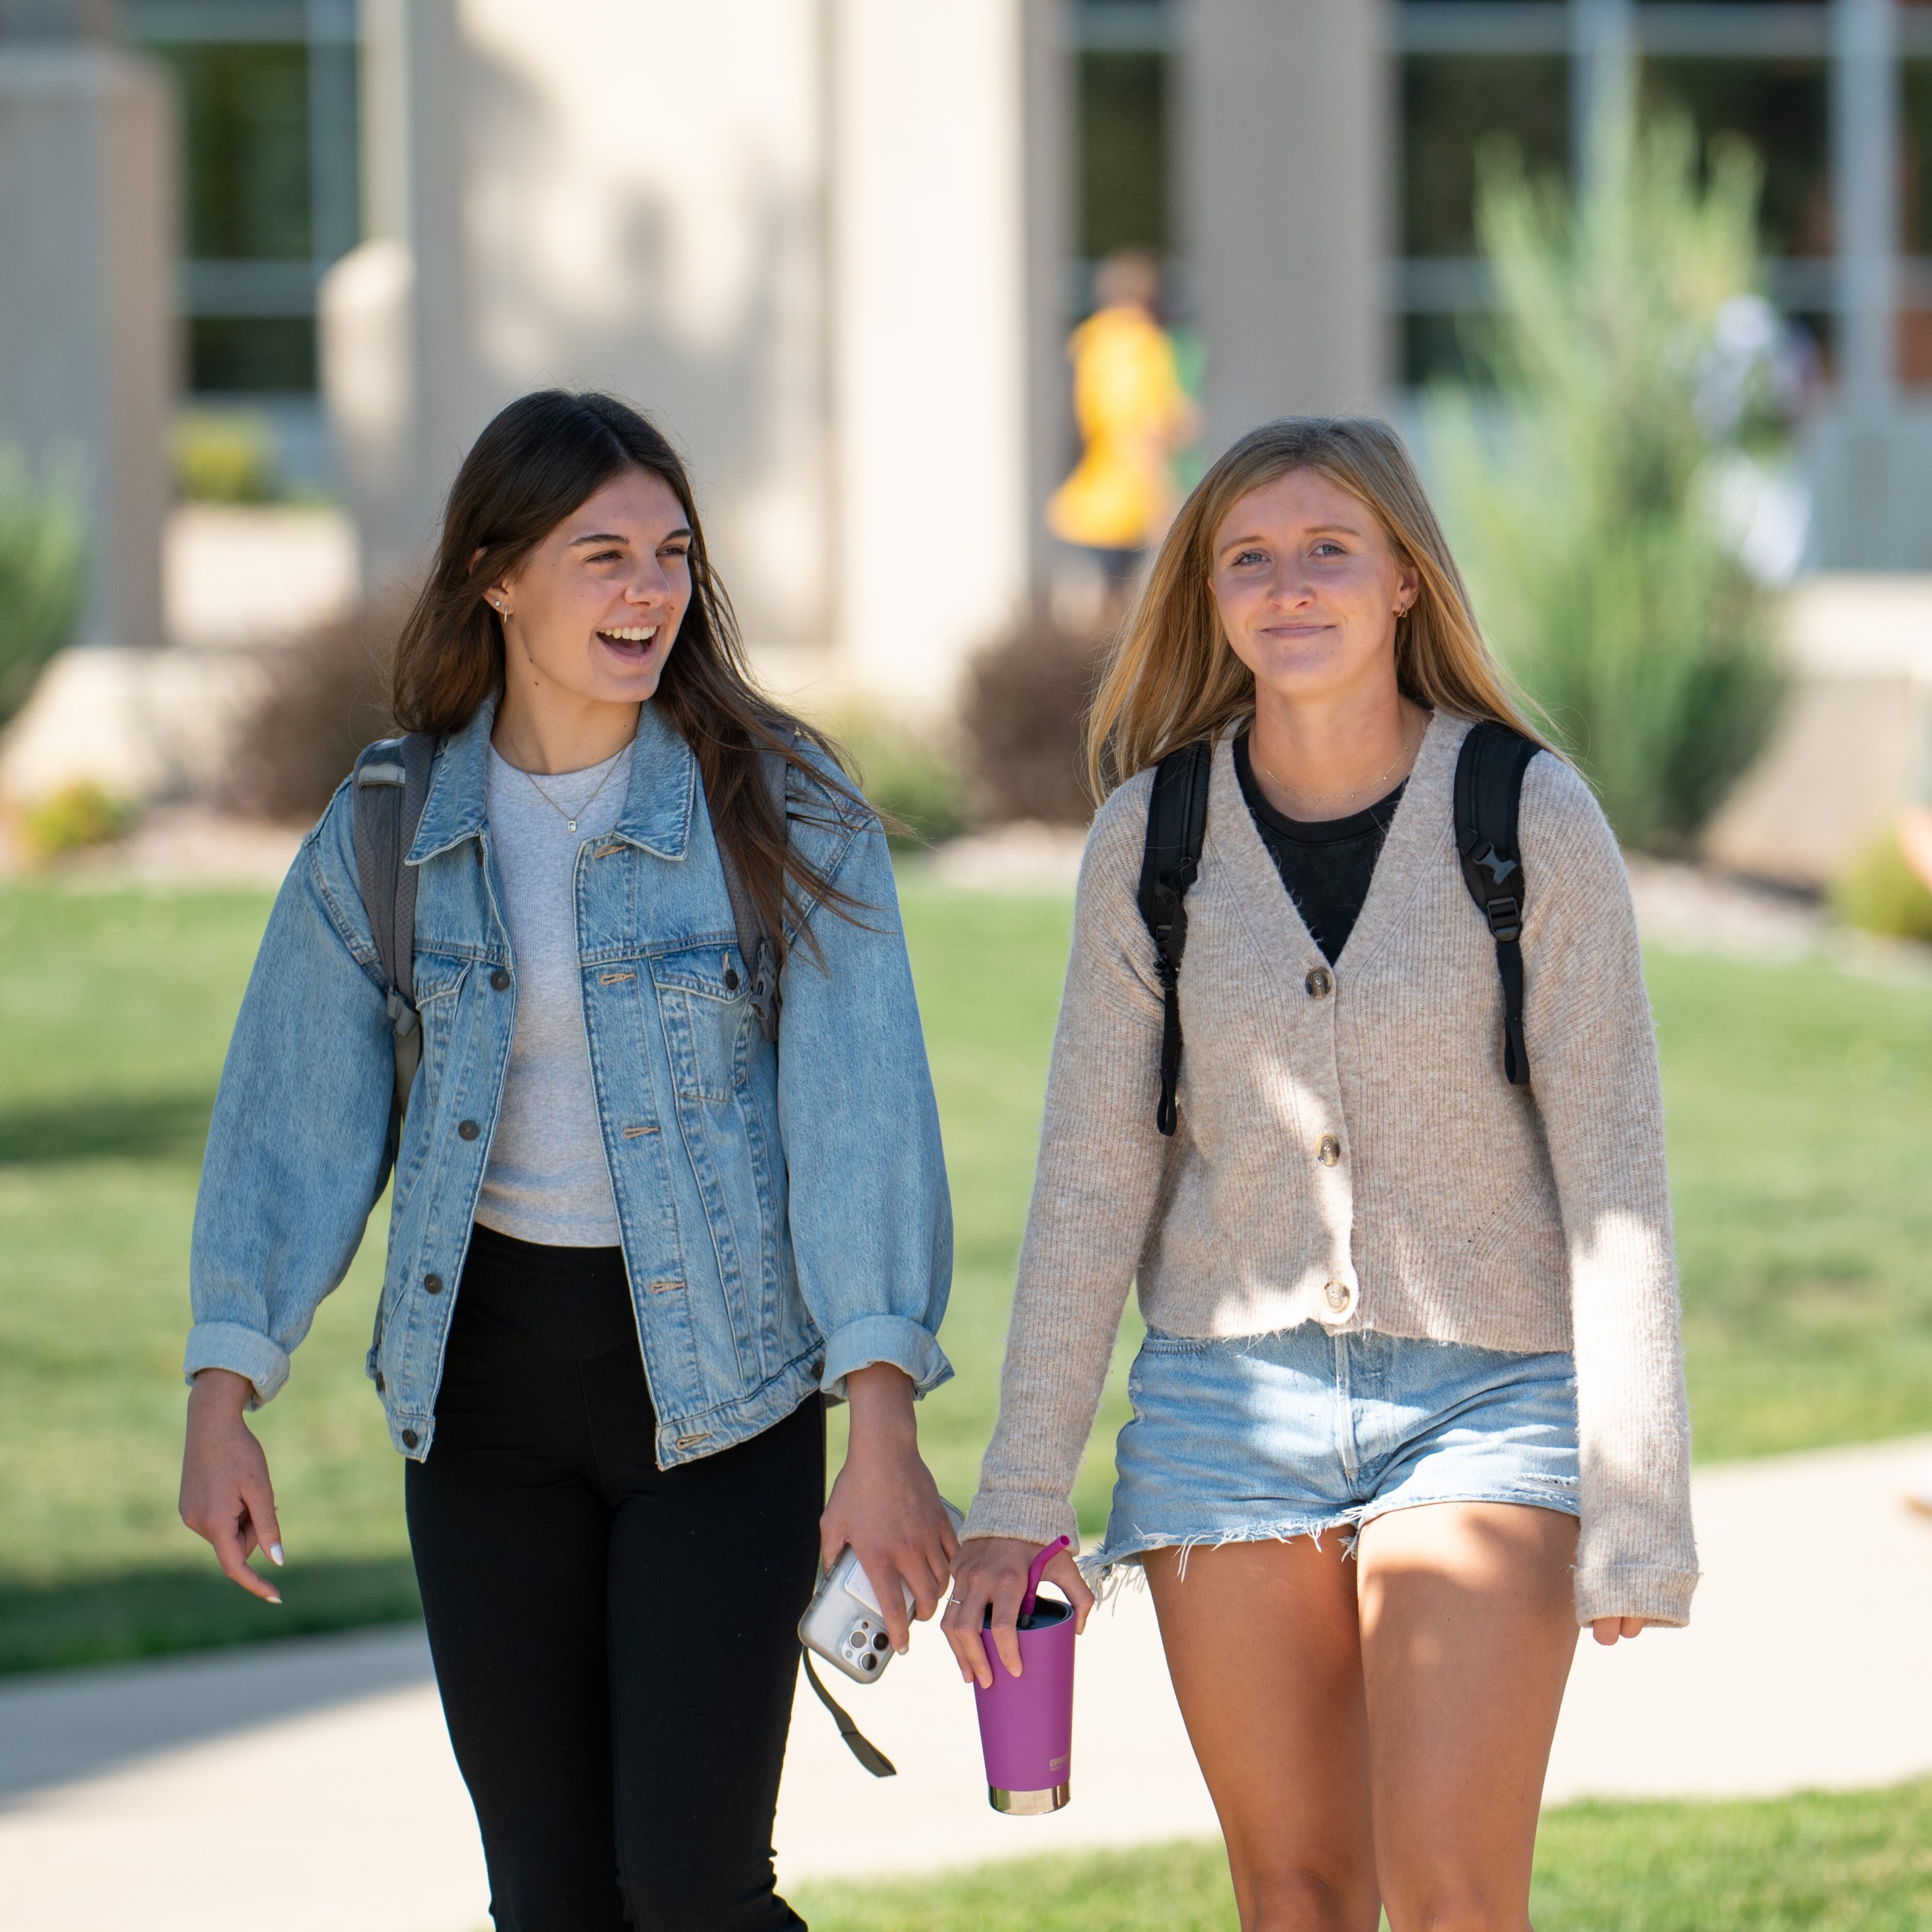 Students walking a crossed campus